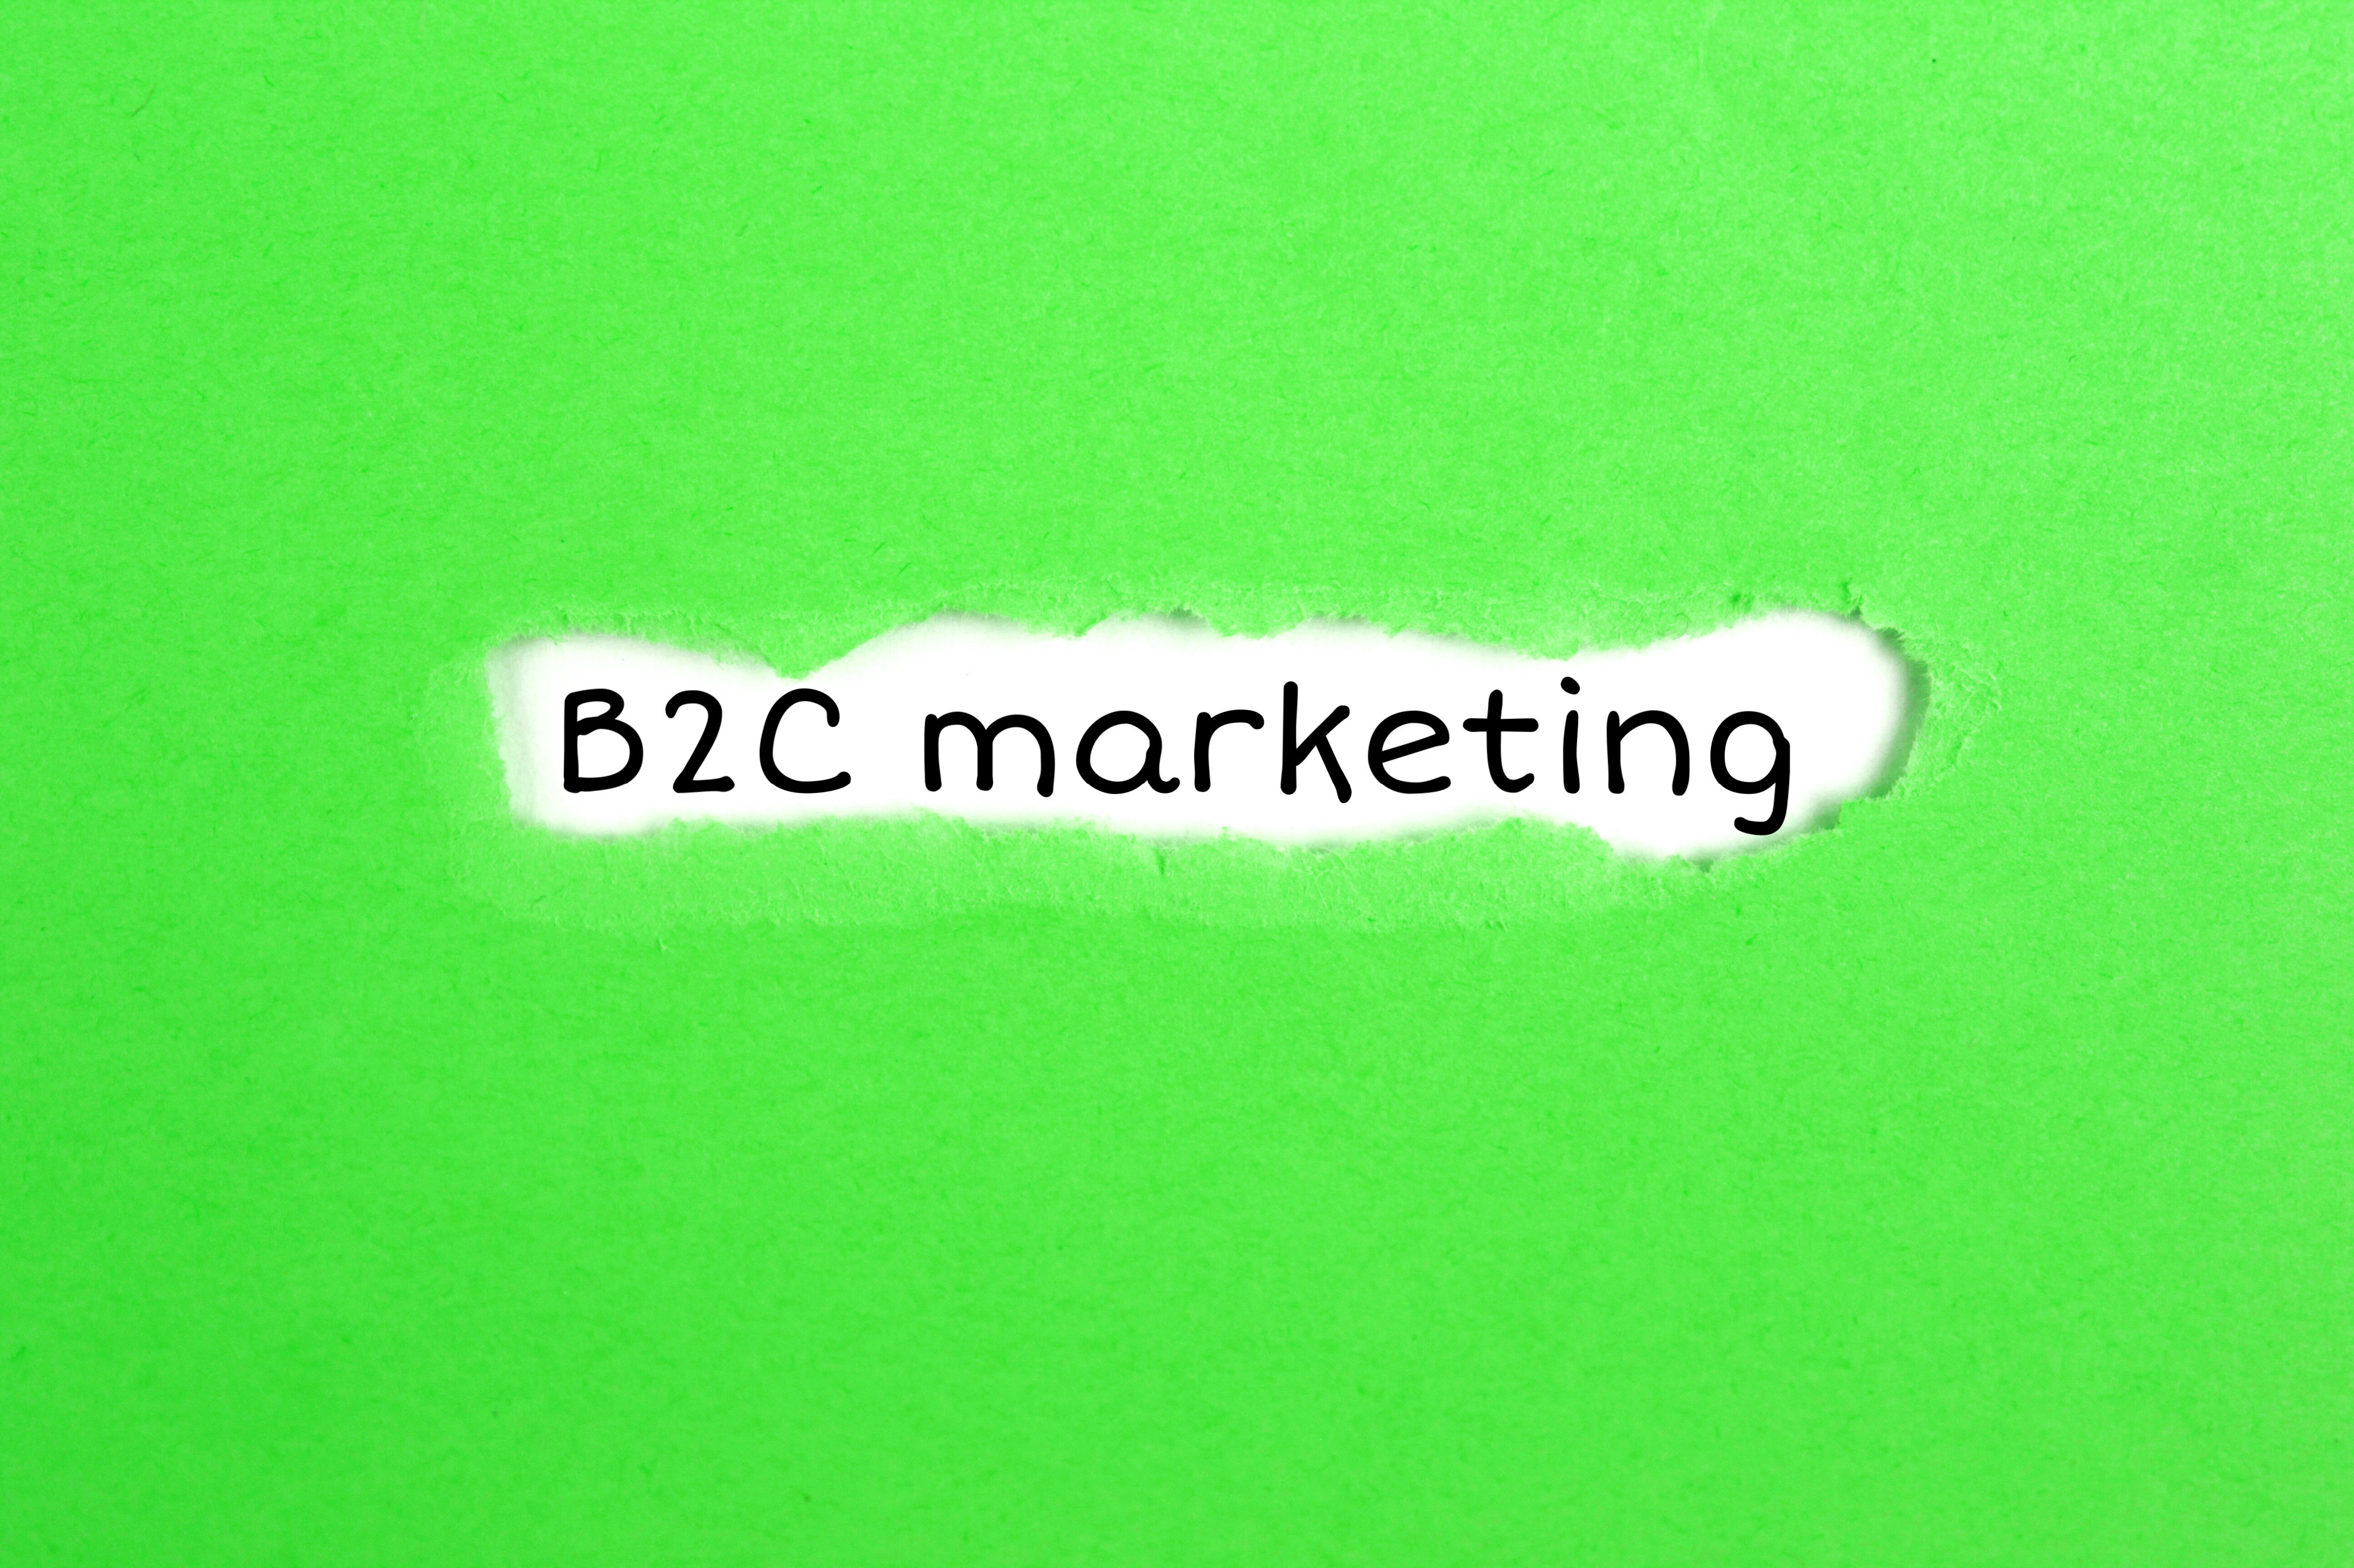 Business-to-consumer marketing, or B2C marketing